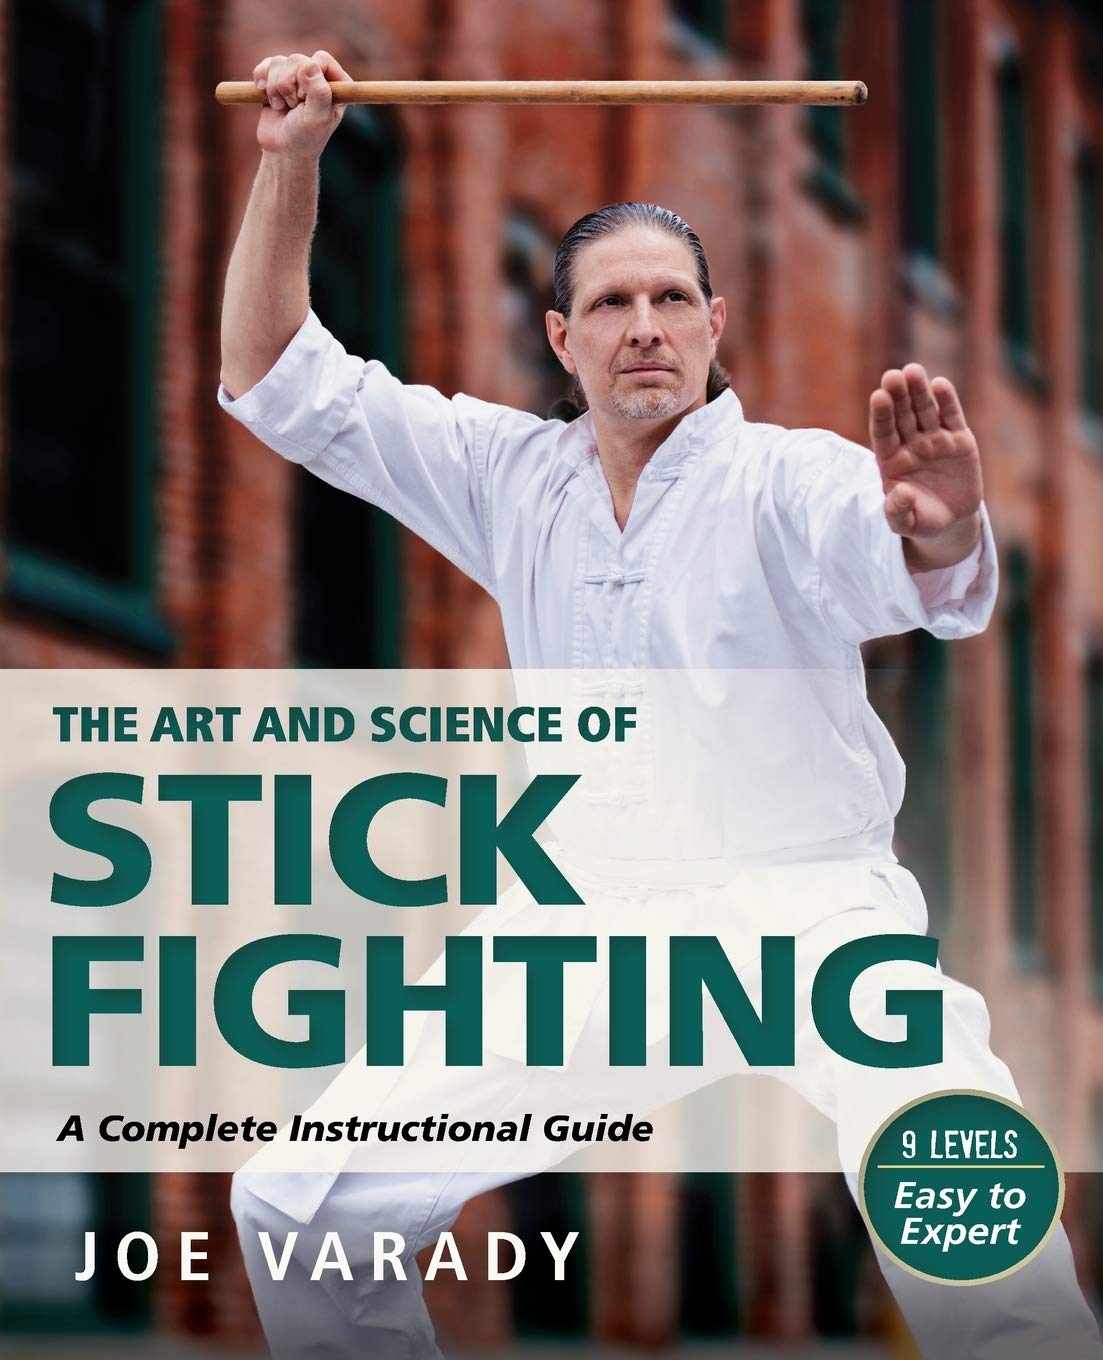 The Art and Science of Stick Fighting: Complete Instructional Guide Book by Joe Varady - Budovideos Inc